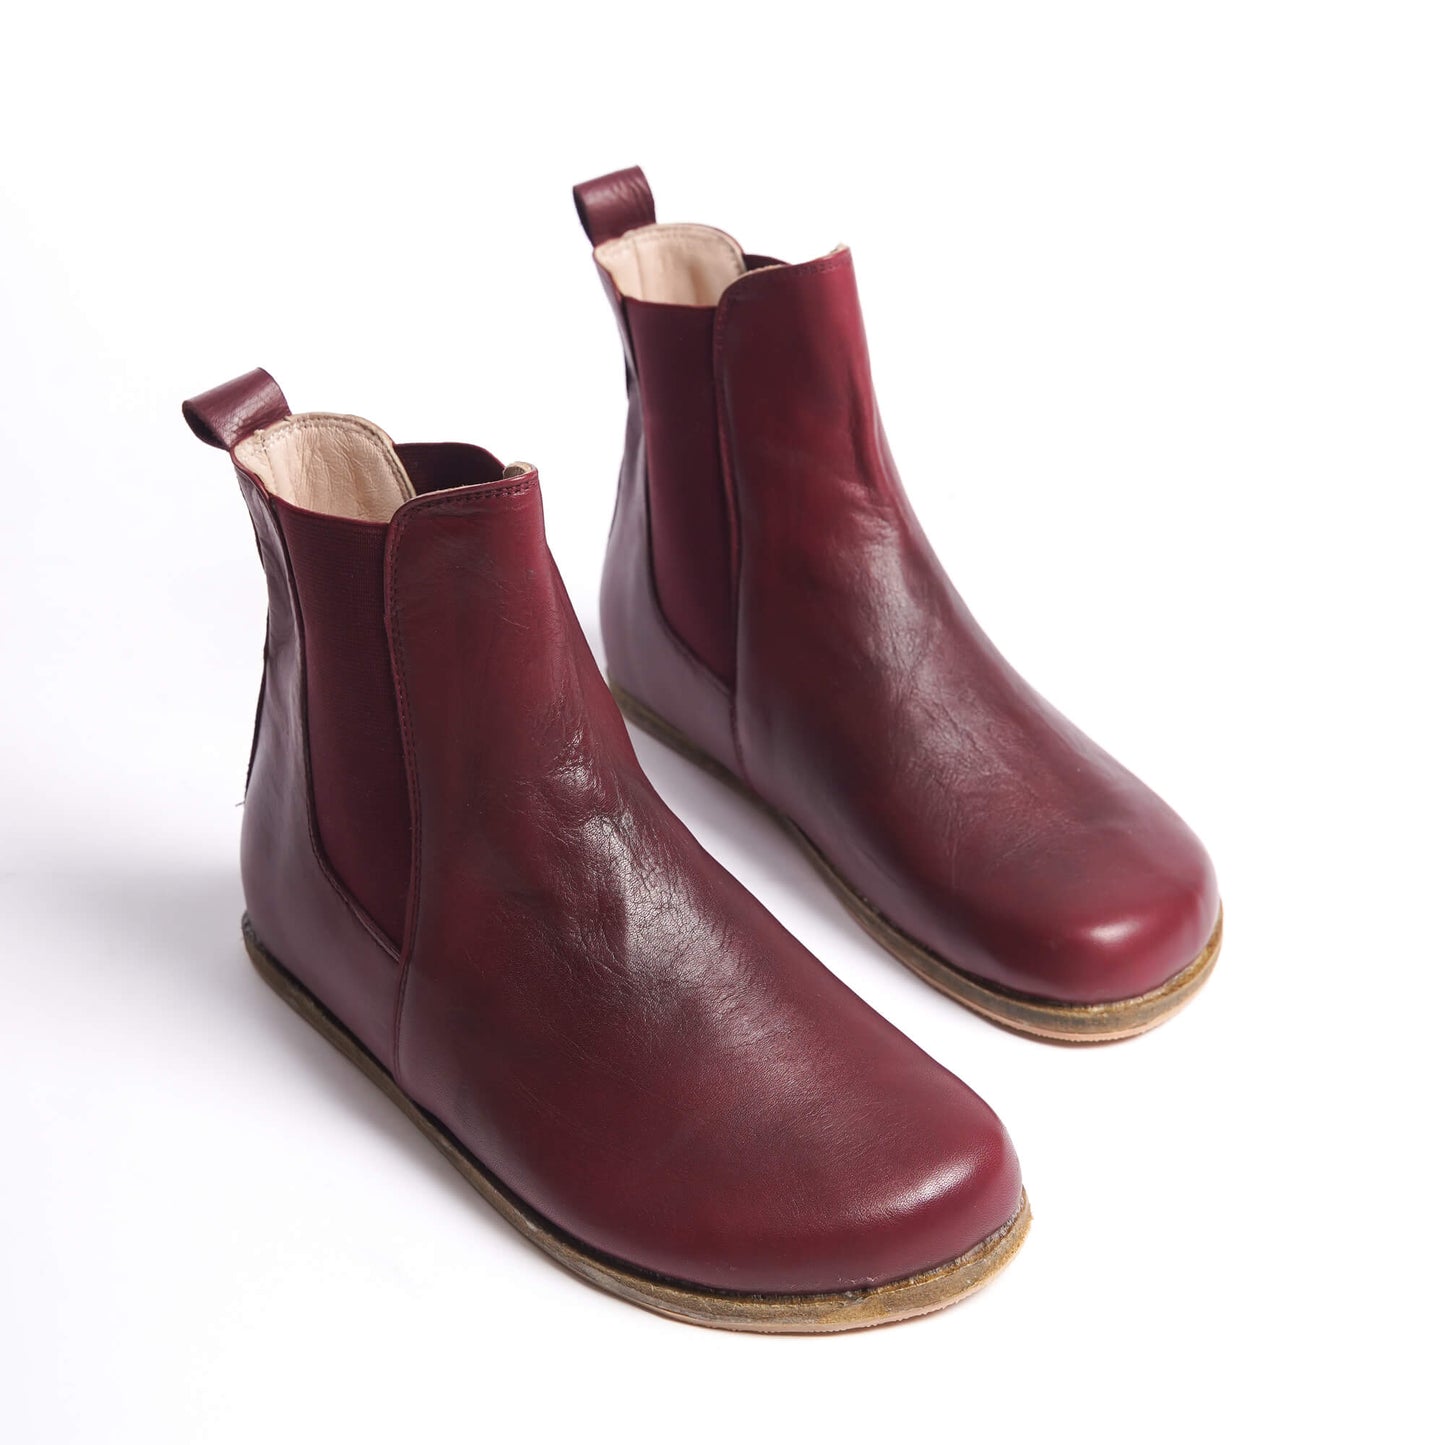 Burgundy Chelsea boots for women with a wide toe box, crafted from natural leather. Ideal for a minimalist and comfortable style.